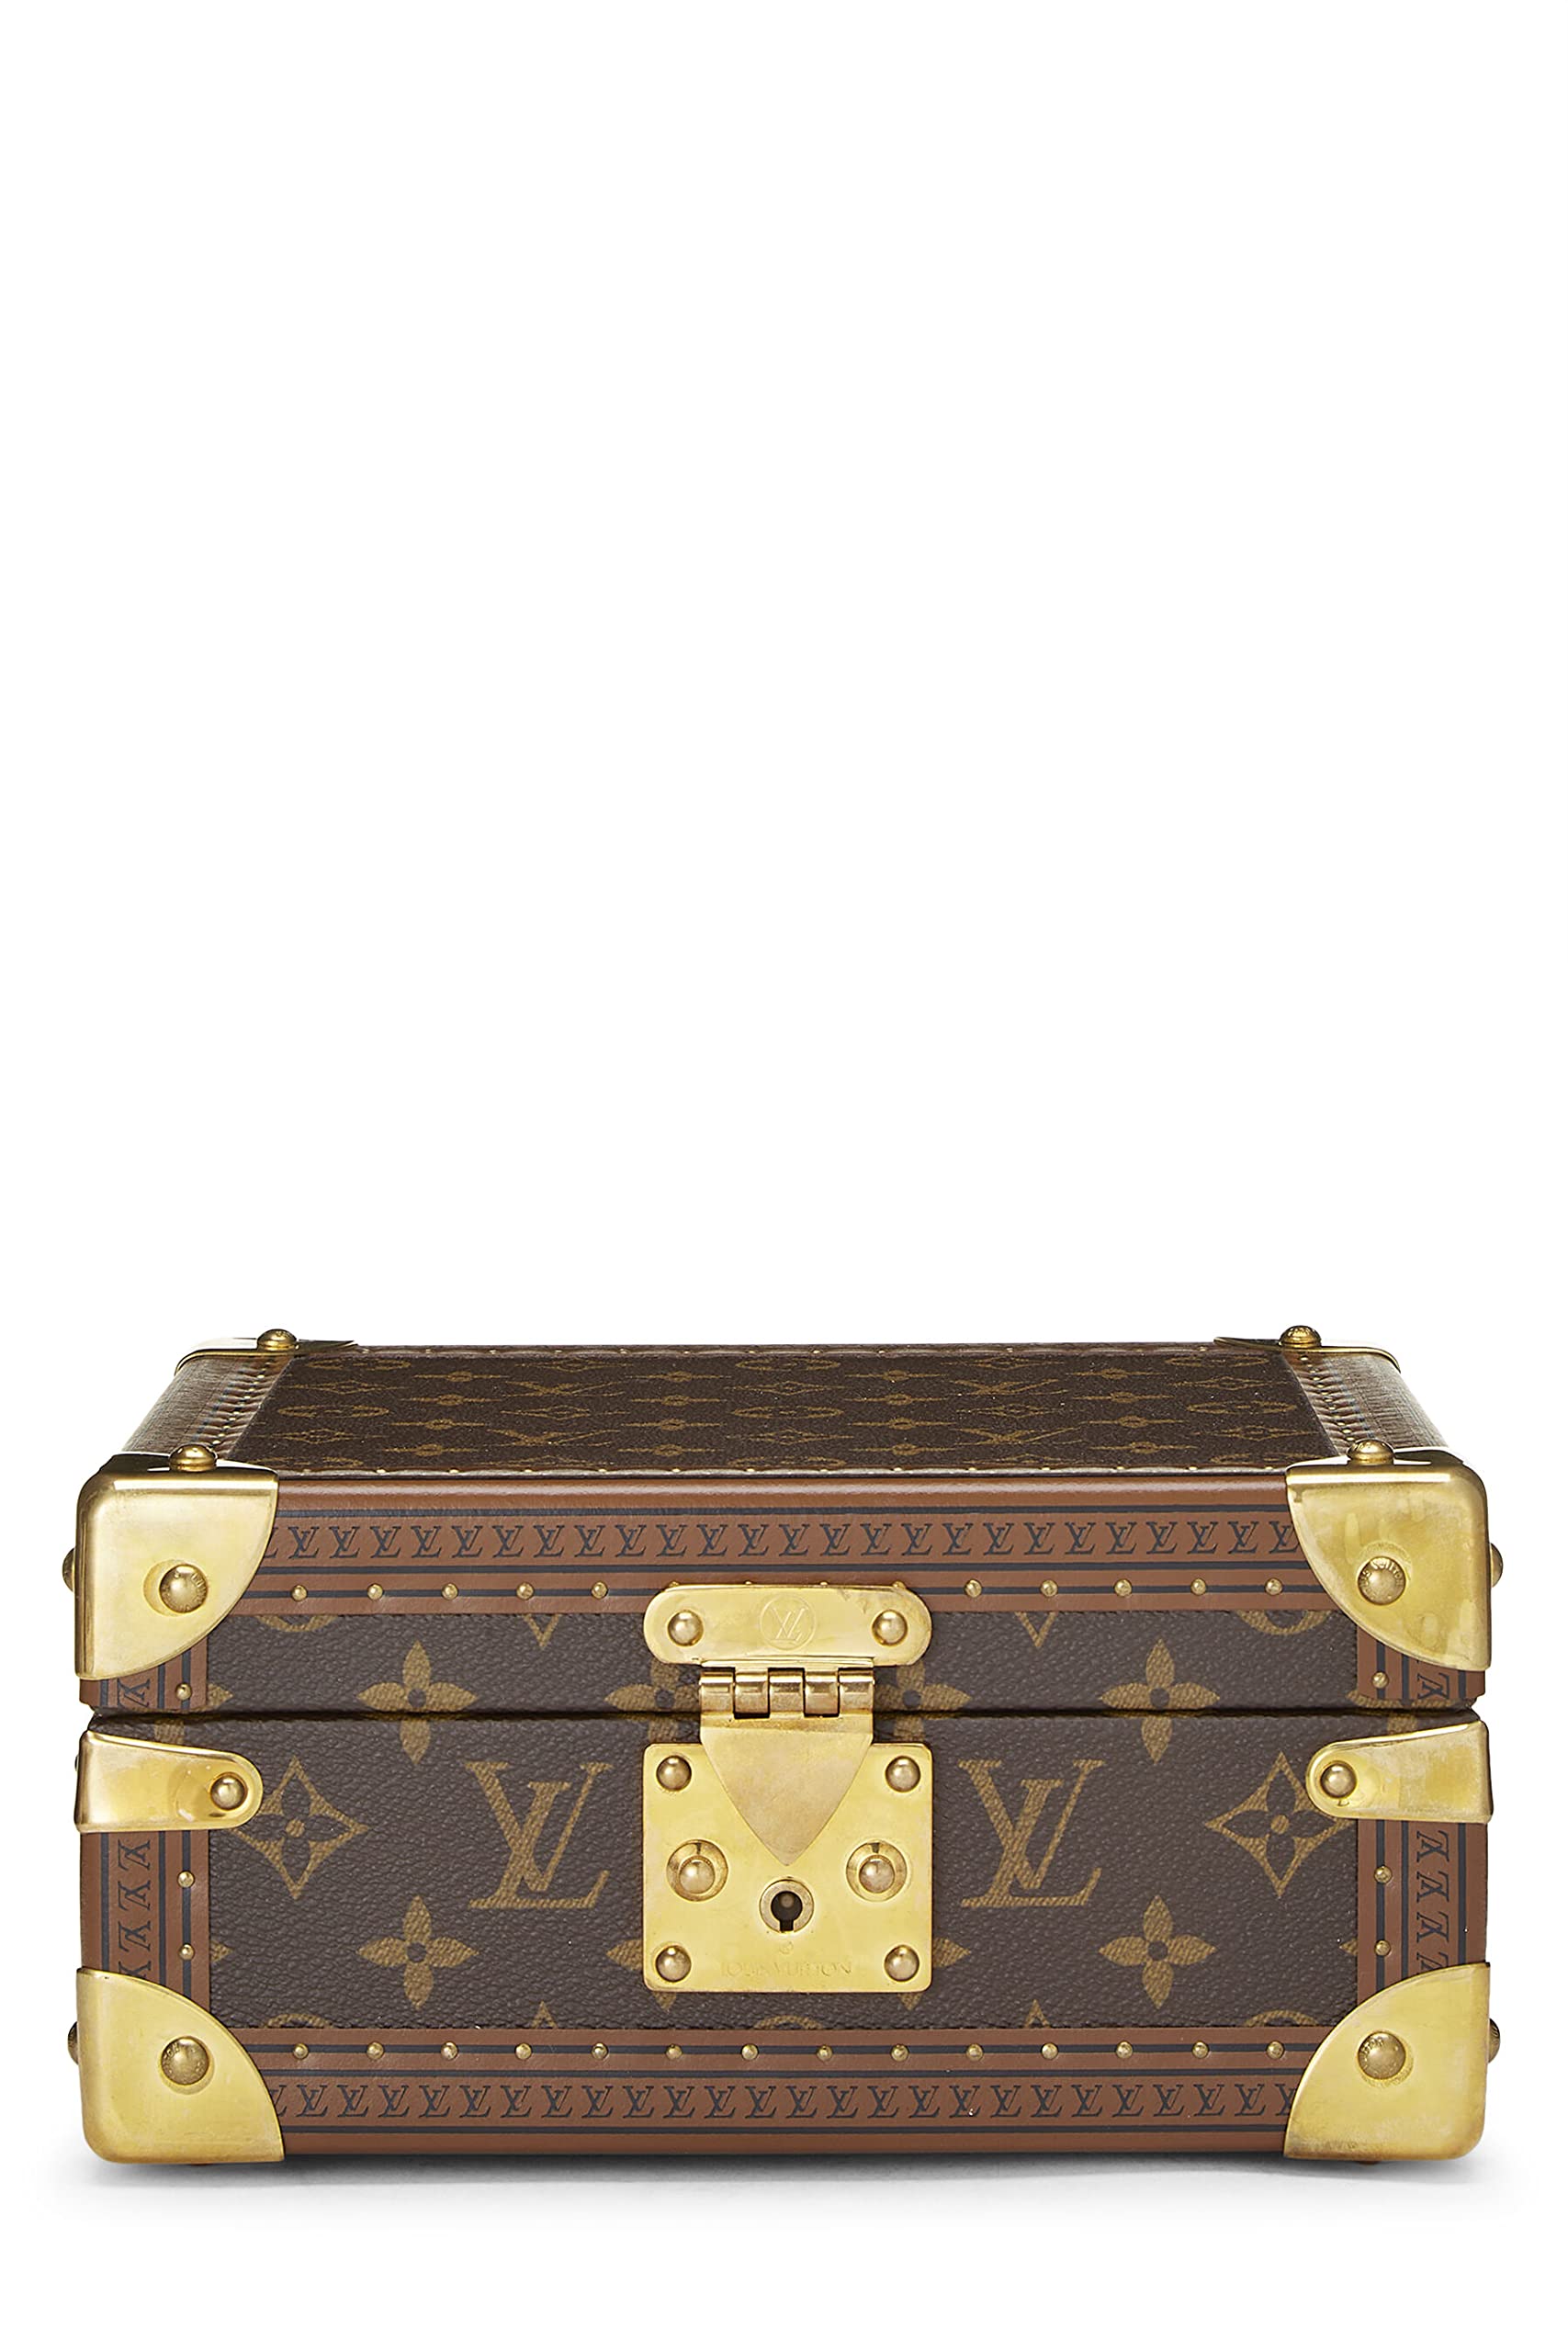 Boxes  Art of Living Luxury Collection  LOUIS VUITTON